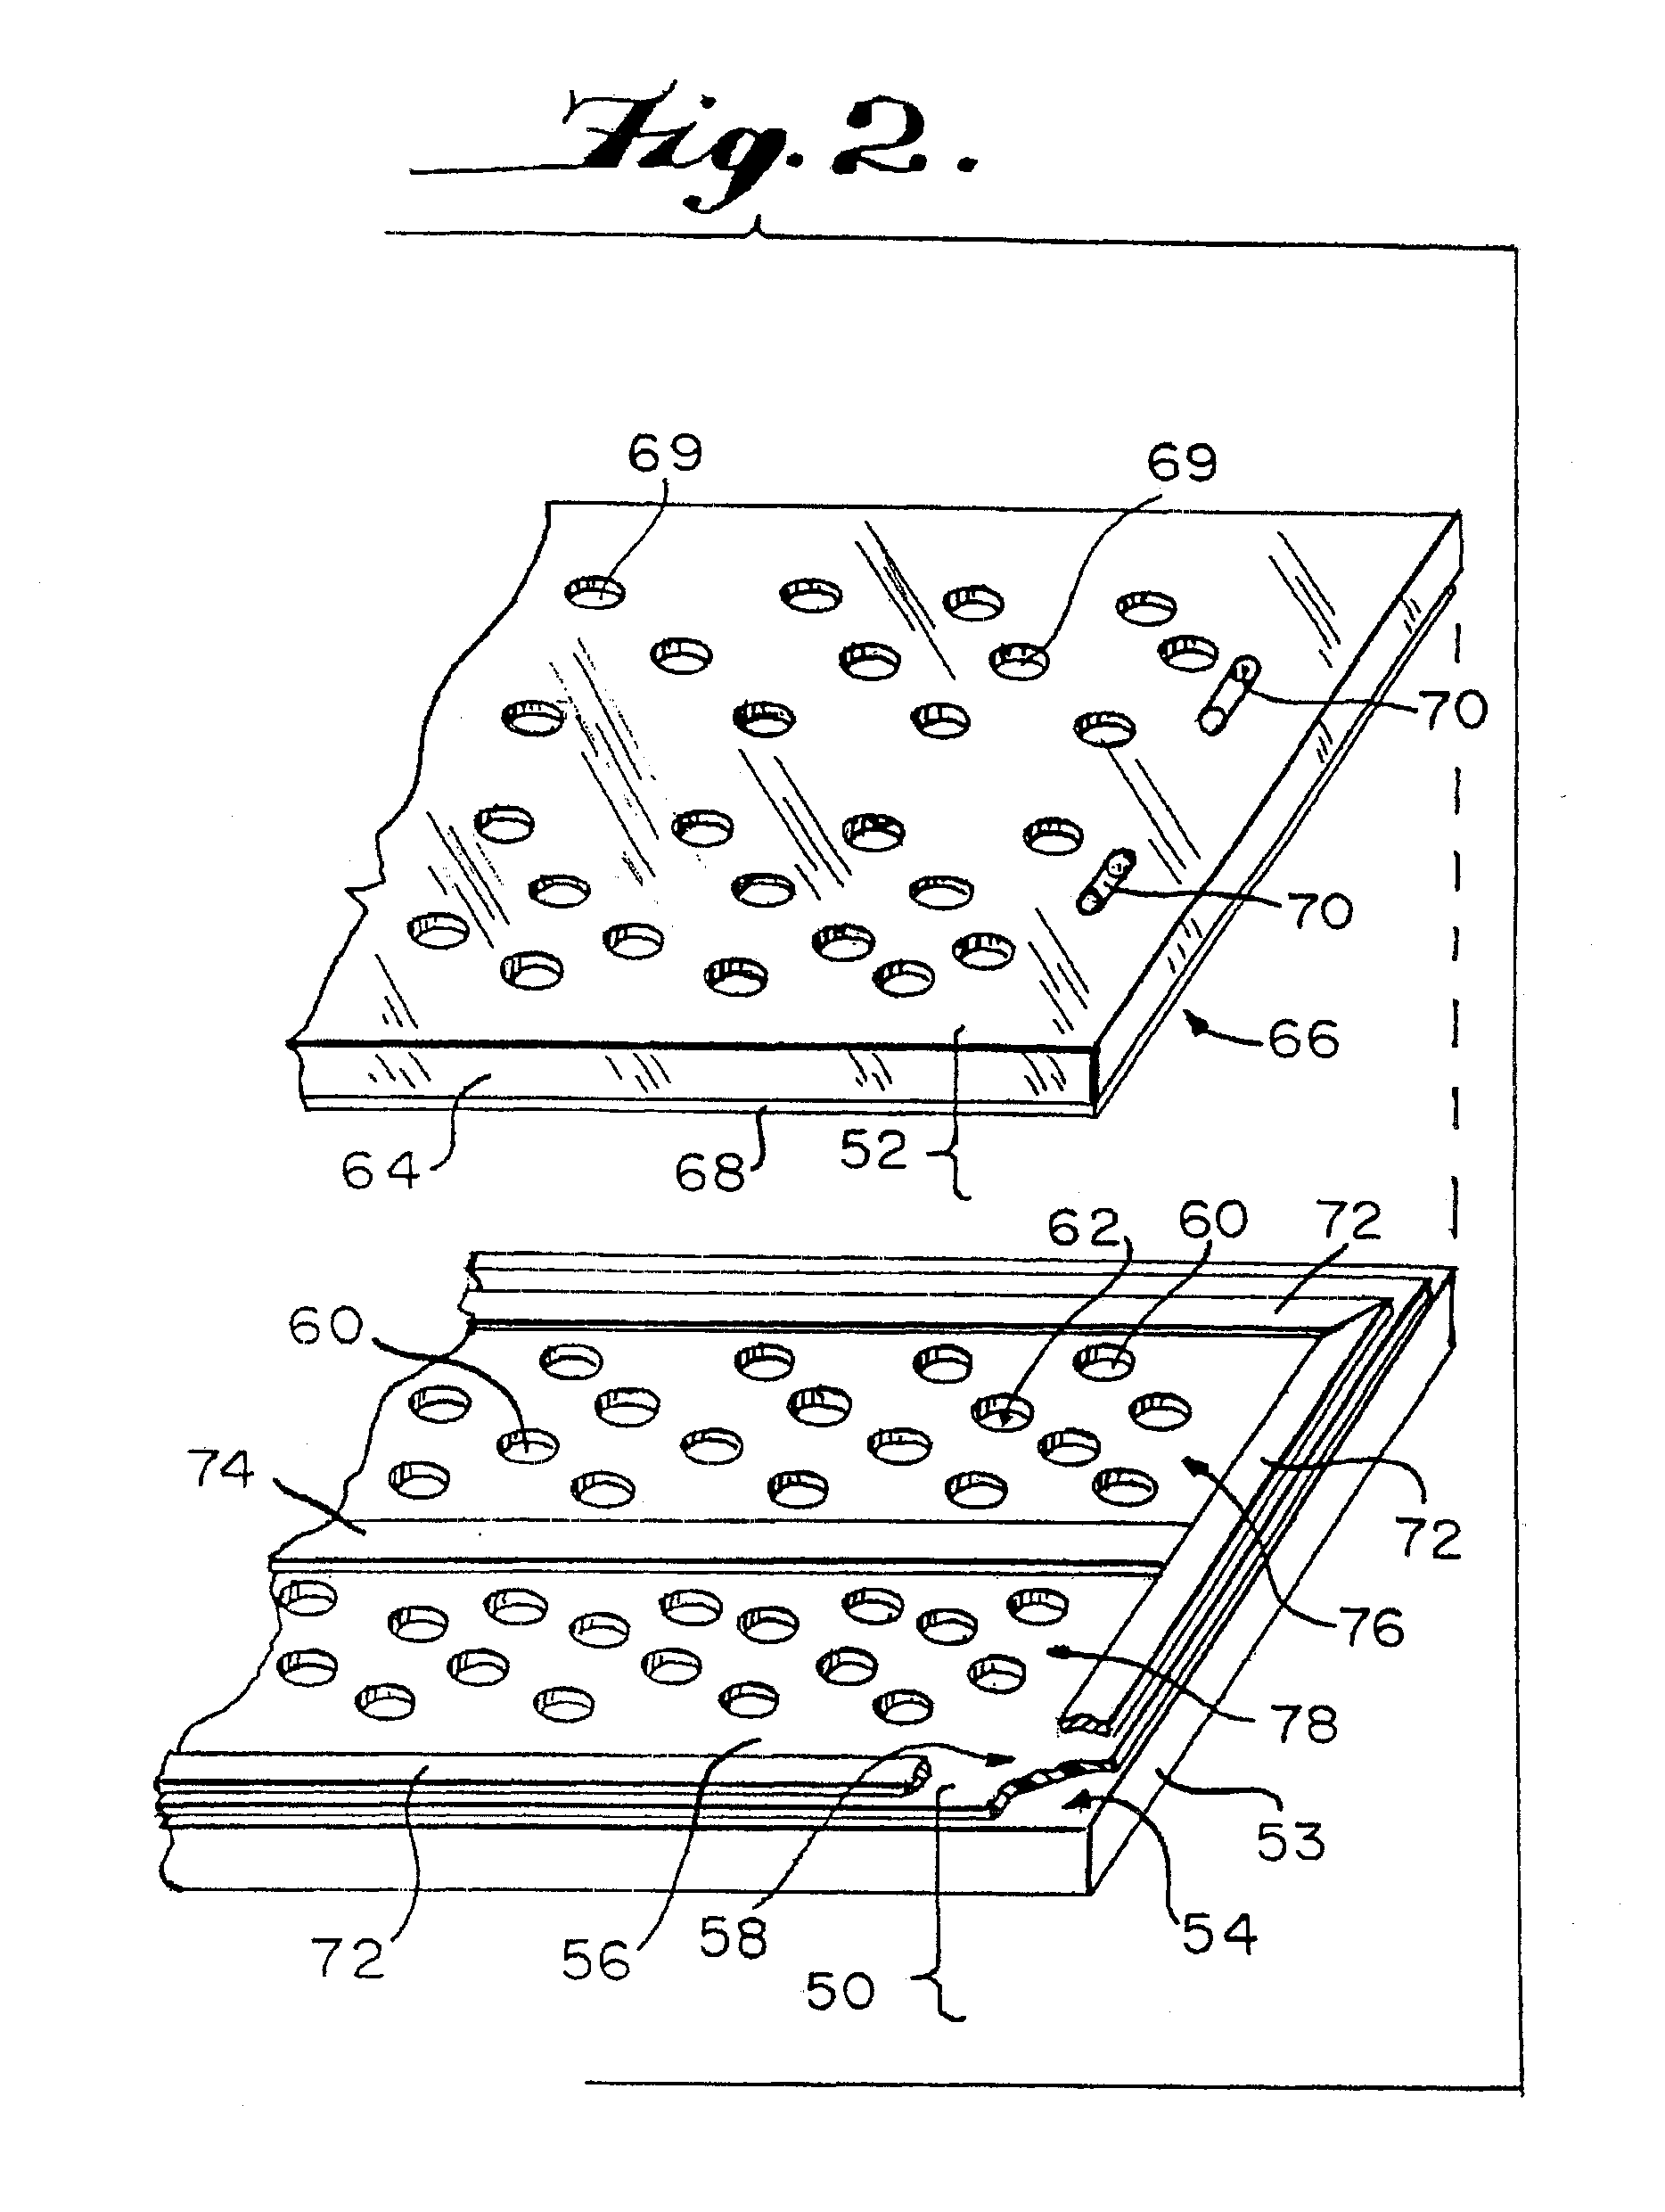 Method and device for detecting the presence of a single target nucleic acid in a sample